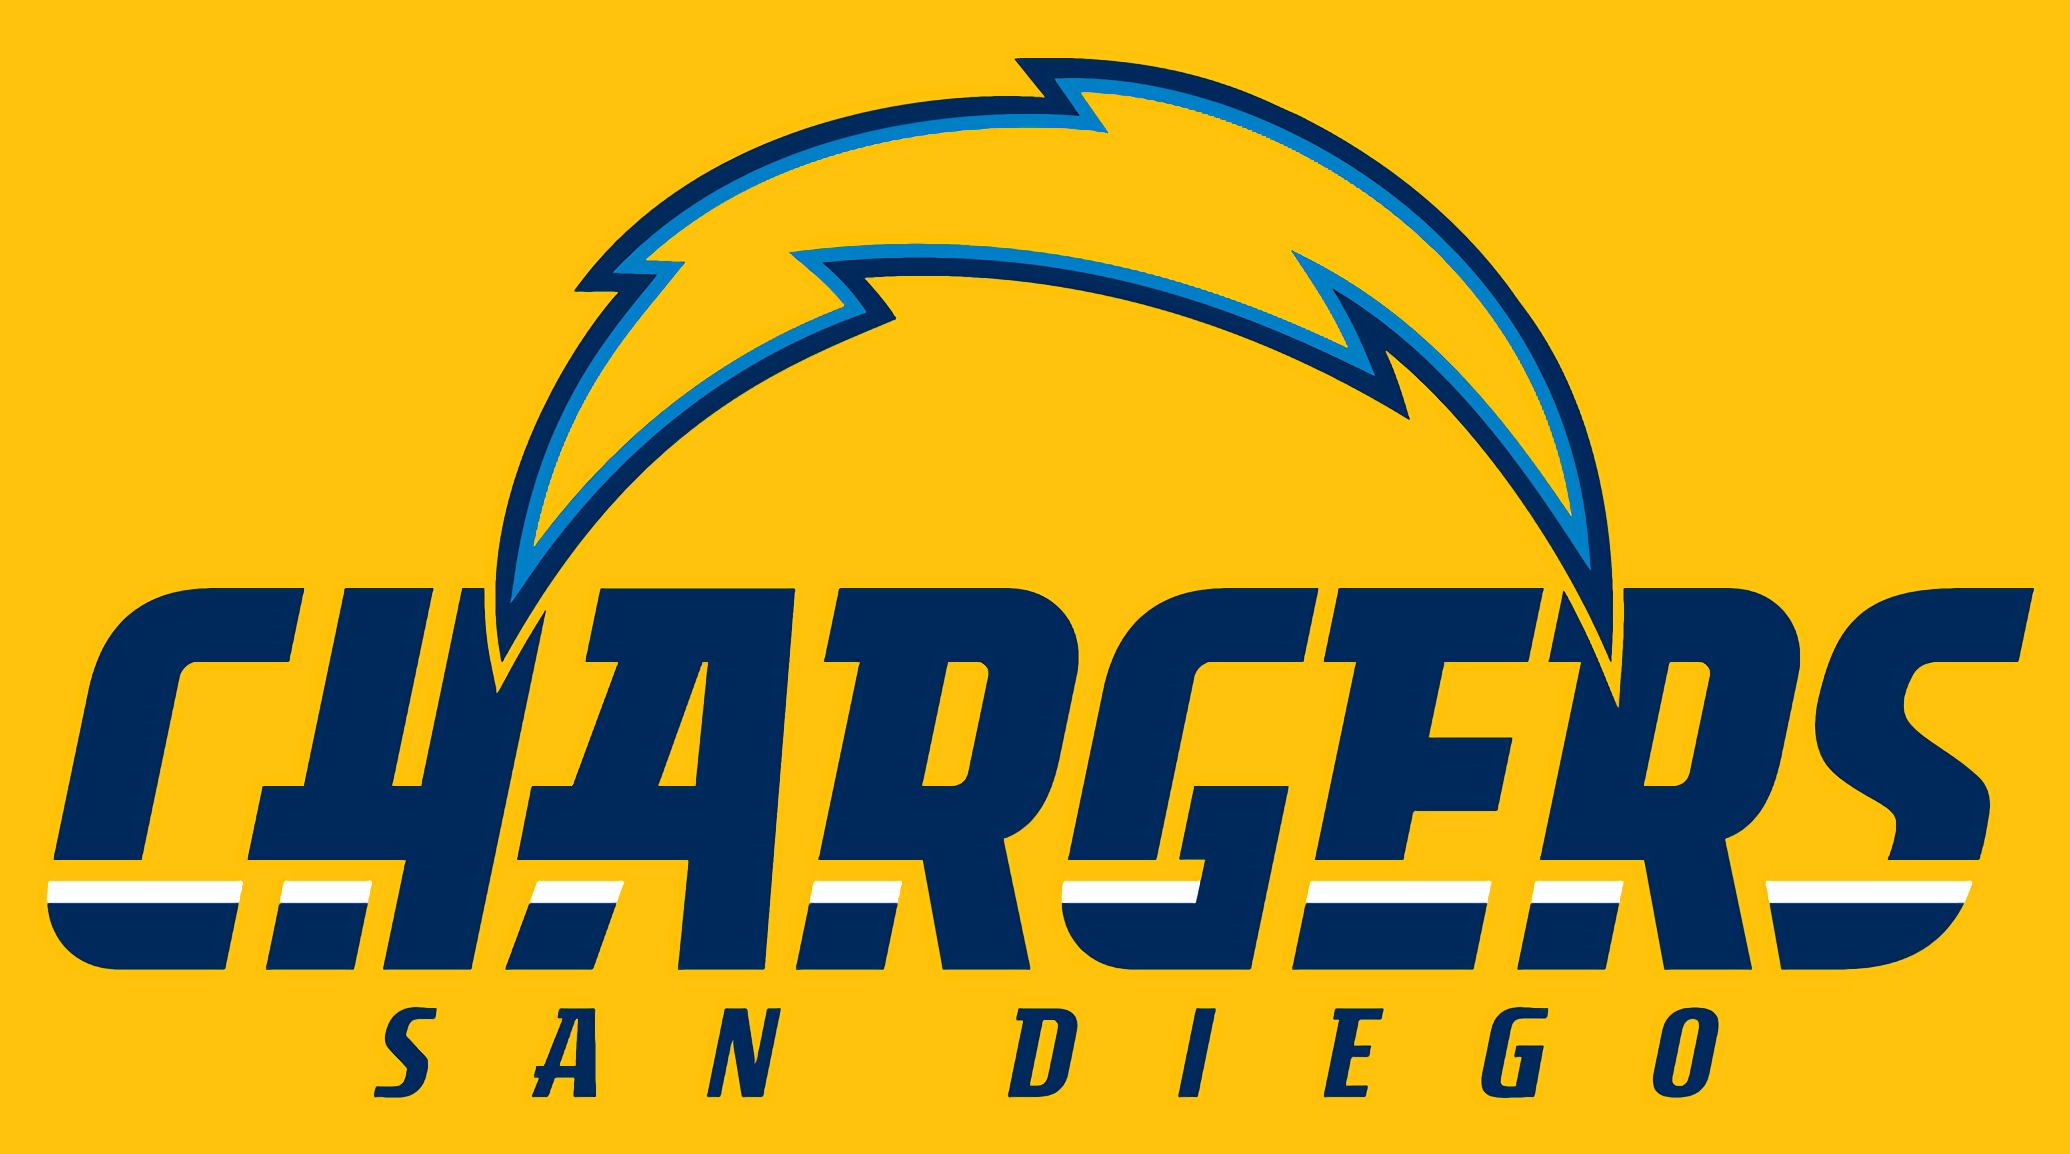 Los Angeles Chargers wallpaper  Los angeles chargers, Chargers